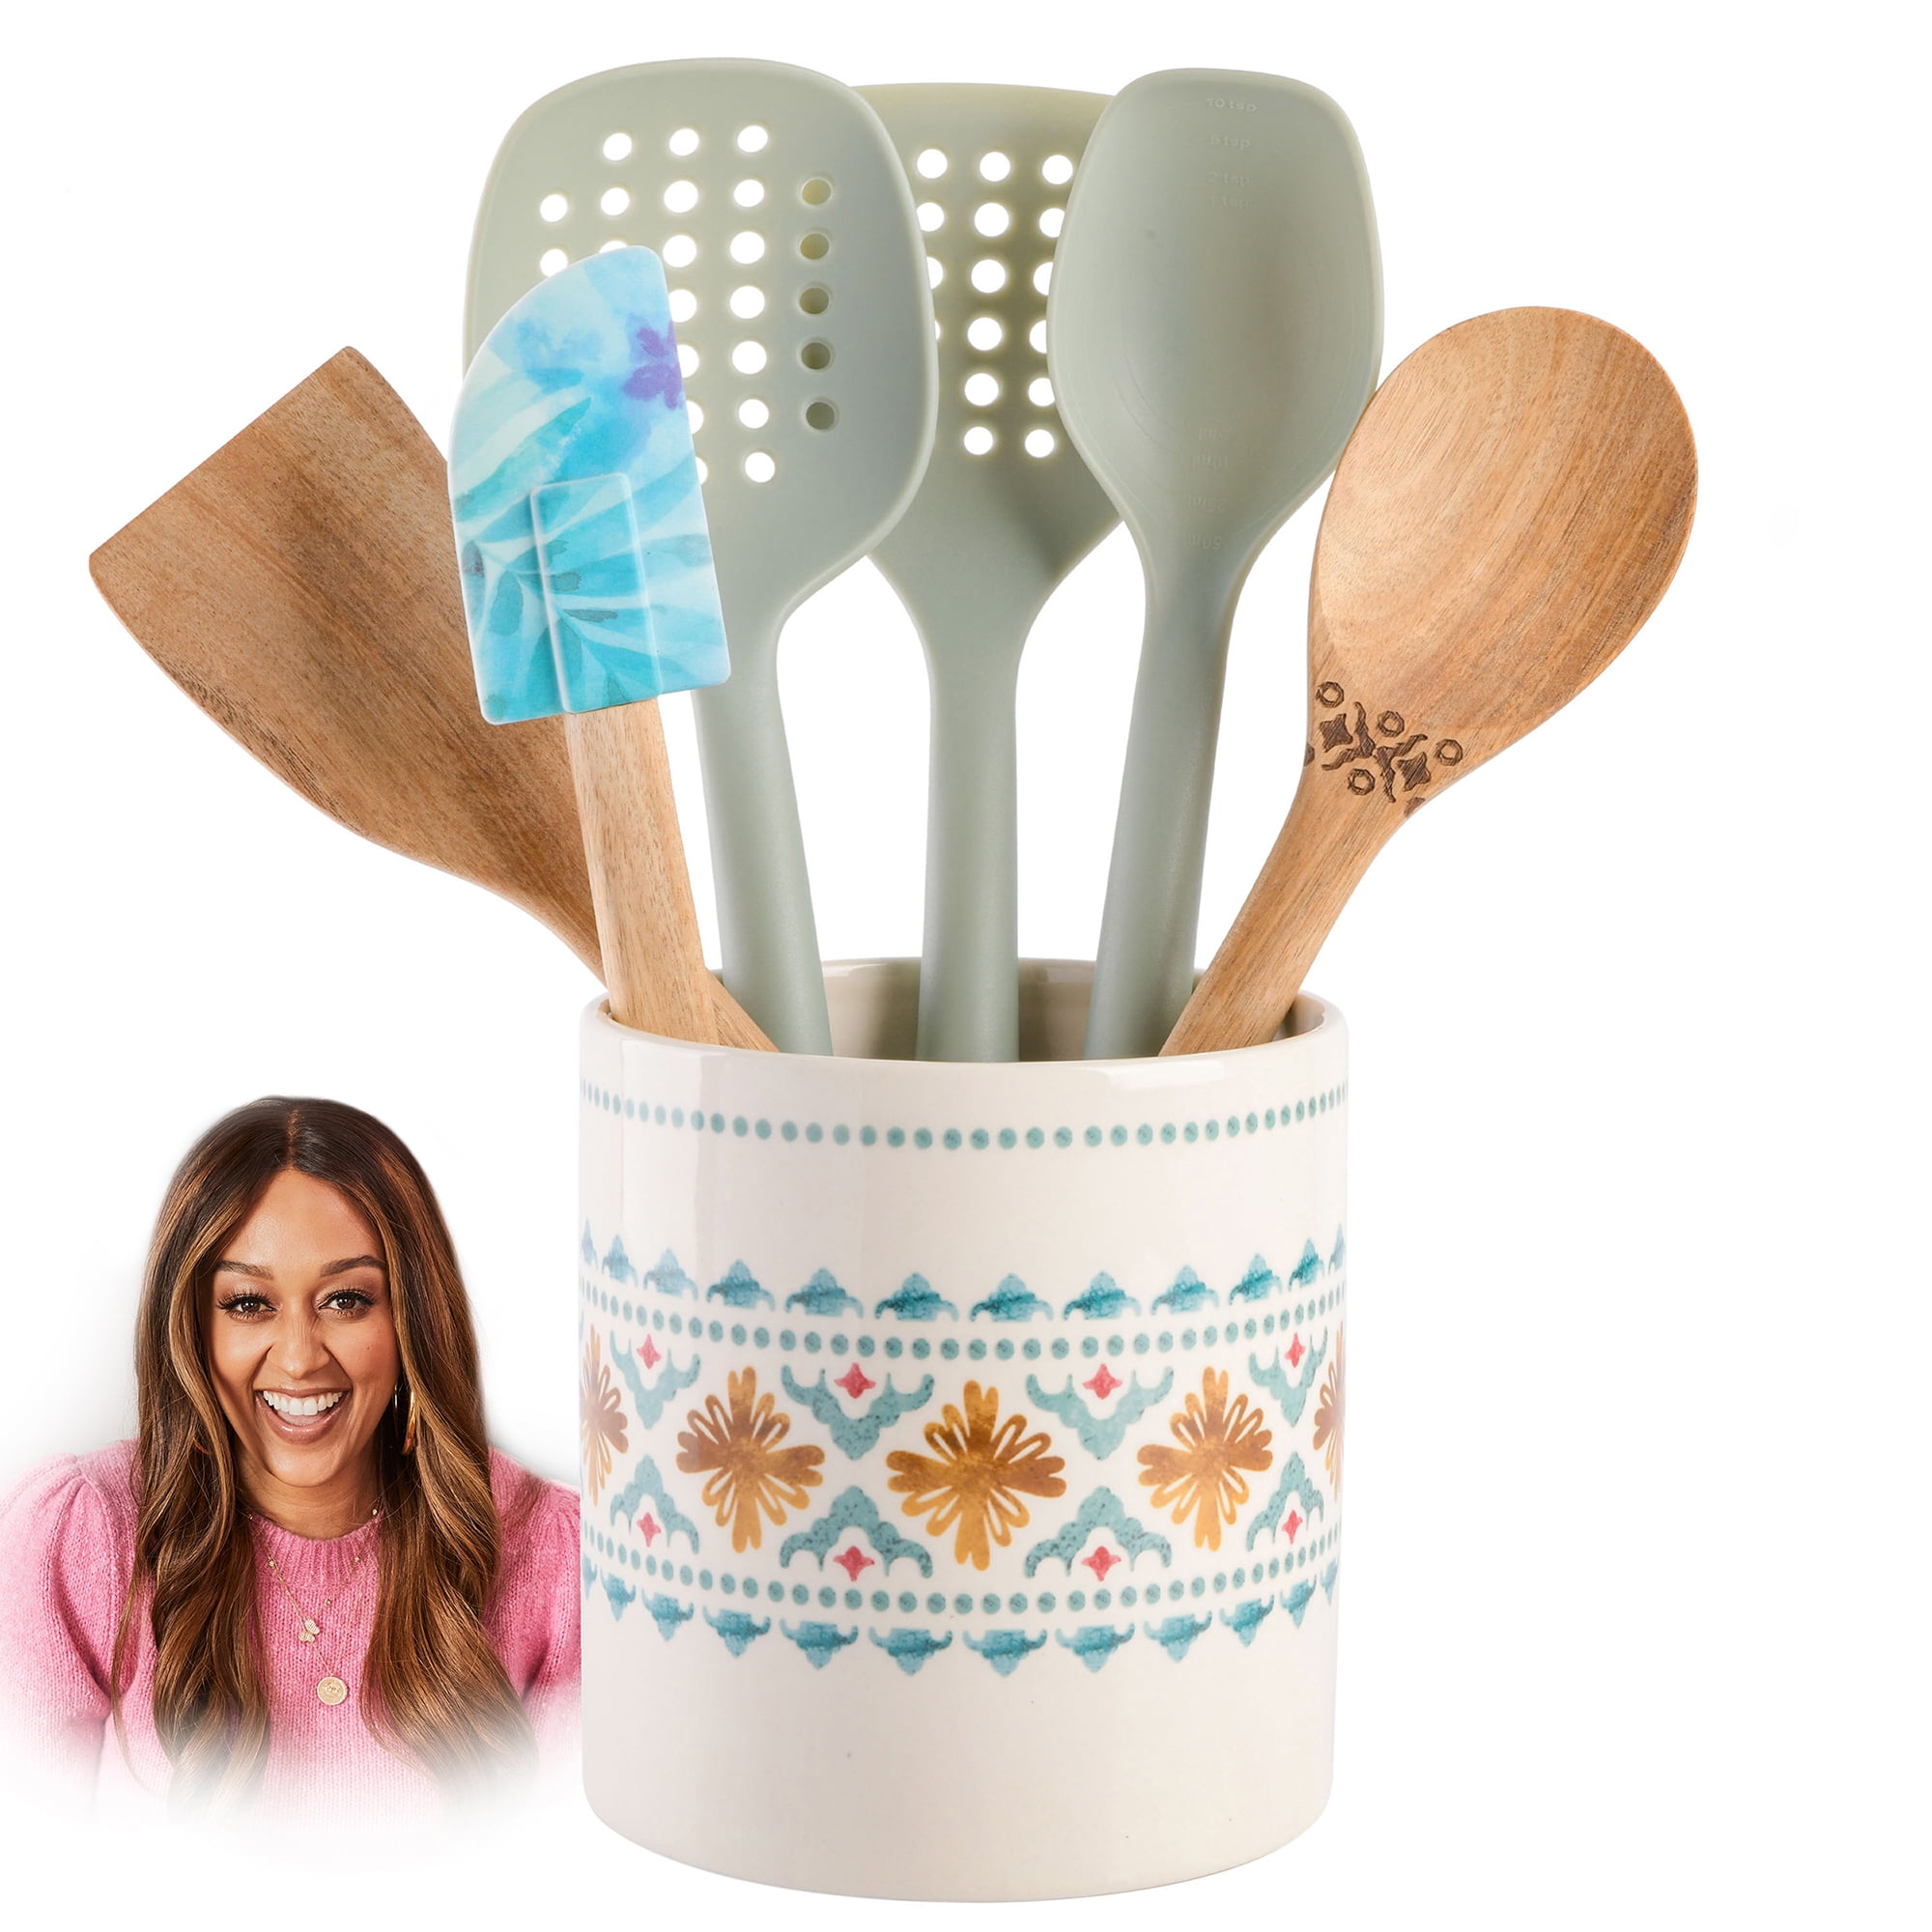 Spice by Tia Mowry Savory Saffron 7-Piece Stainless Steel Cutlery Set – Gray